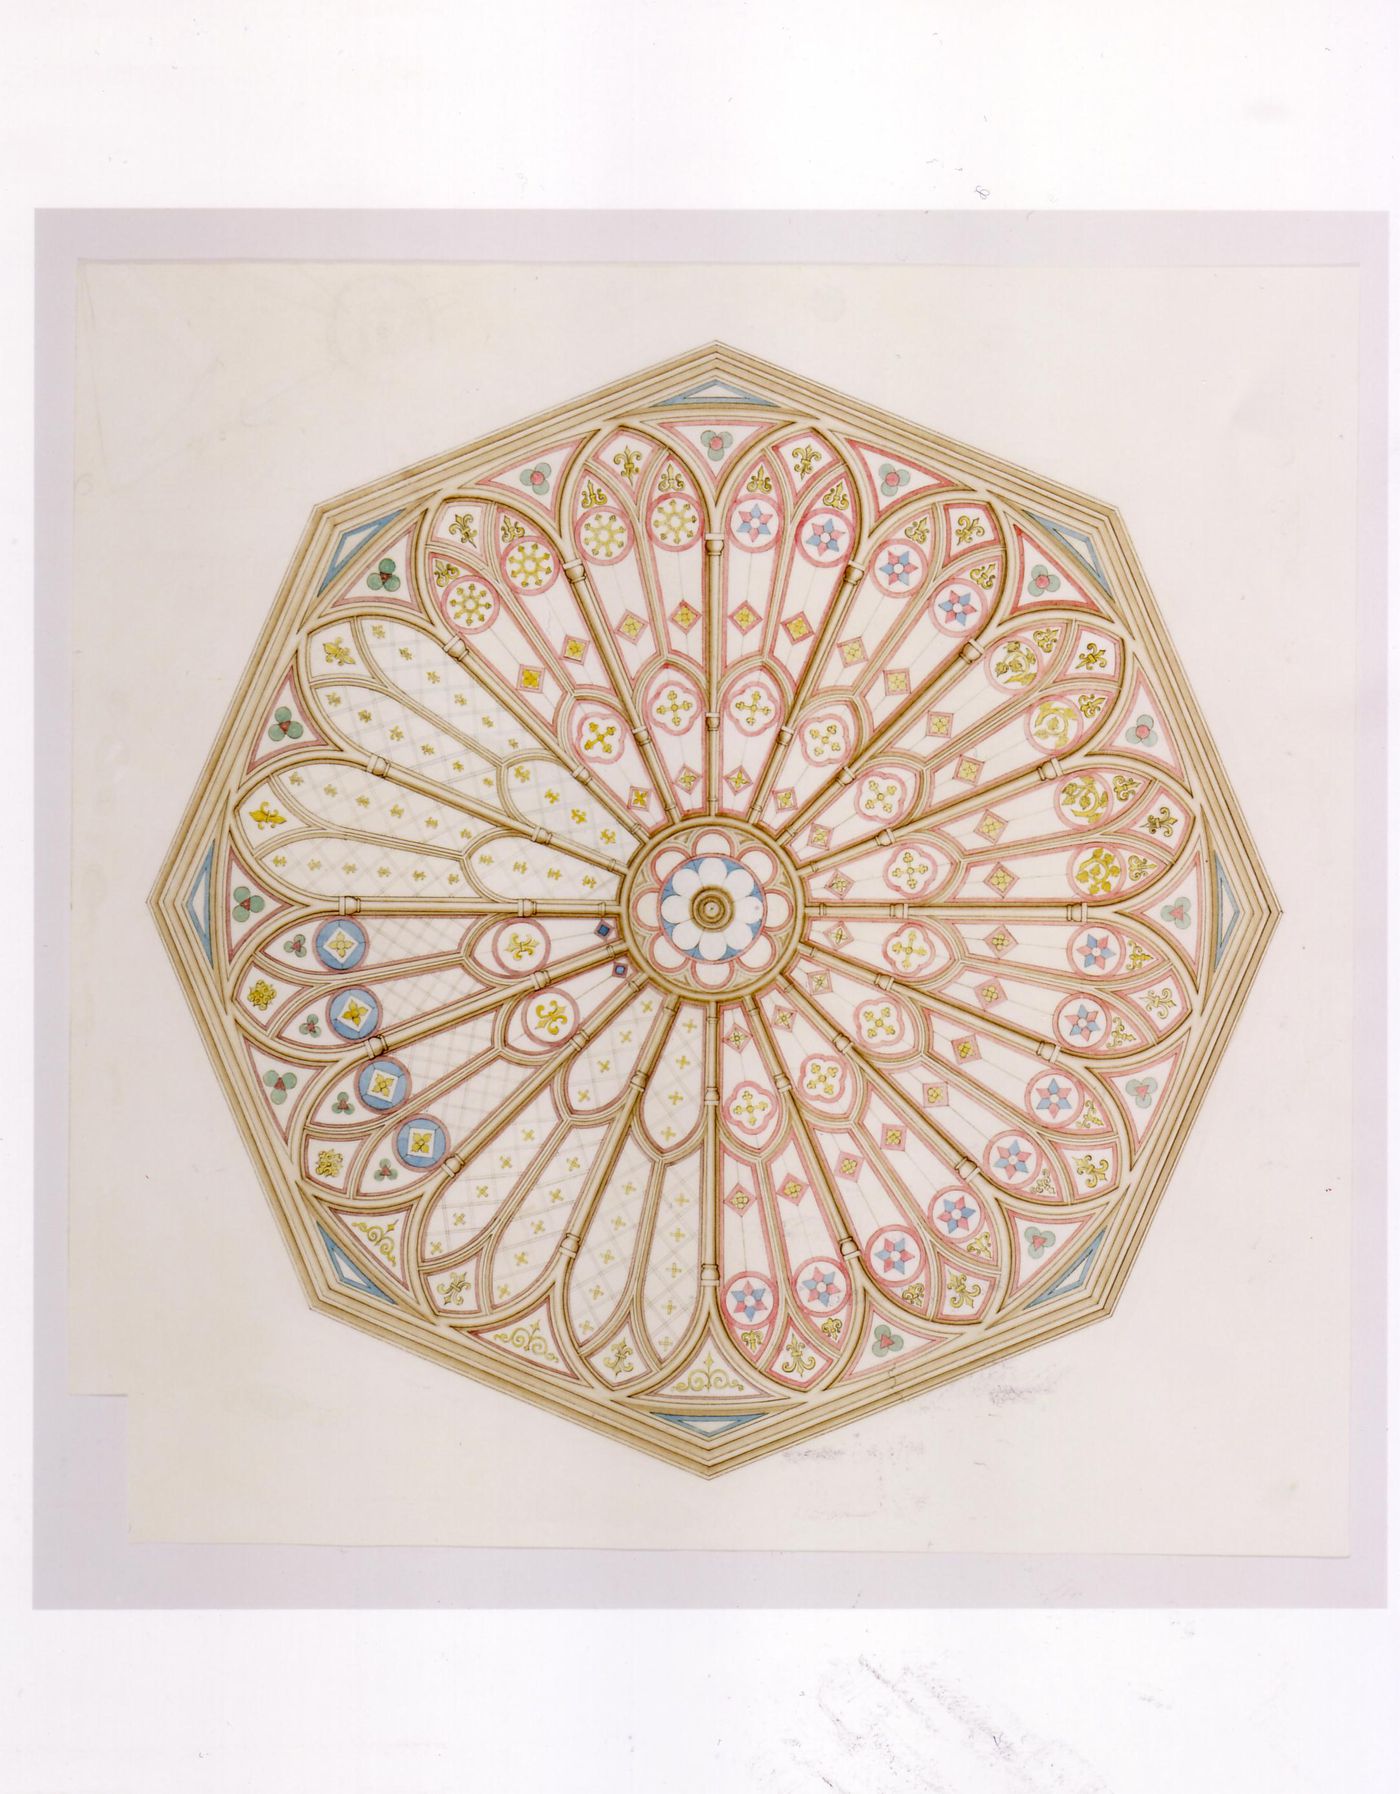 Plan for a stained glass window for the ceiling for the interior design by Bourgeau et Leprohon for Notre-Dame de Montréal